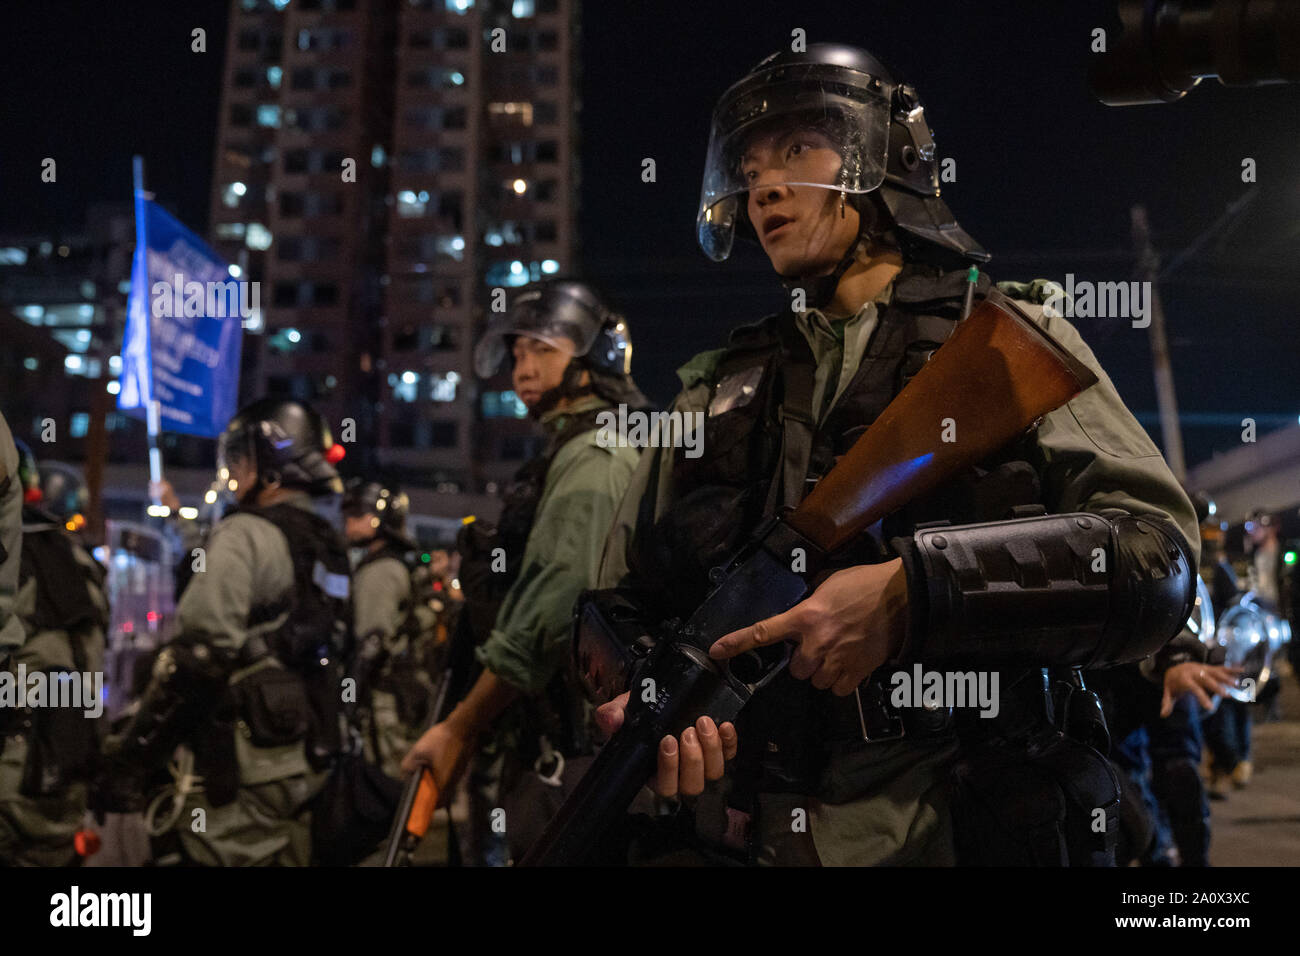 A riot police officer holds his weapon during the protest.Pro-democracy protesters have continued demonstrations across Hong Kong, calling for the city's Chief Executive Carrie Lam to immediately meet the rest of their demands, including an independent inquiry into police brutality, the retraction of the word “riot” to describe the rallies, and genuine universal suffrage, as the territory faces a leadership crisis. Stock Photo